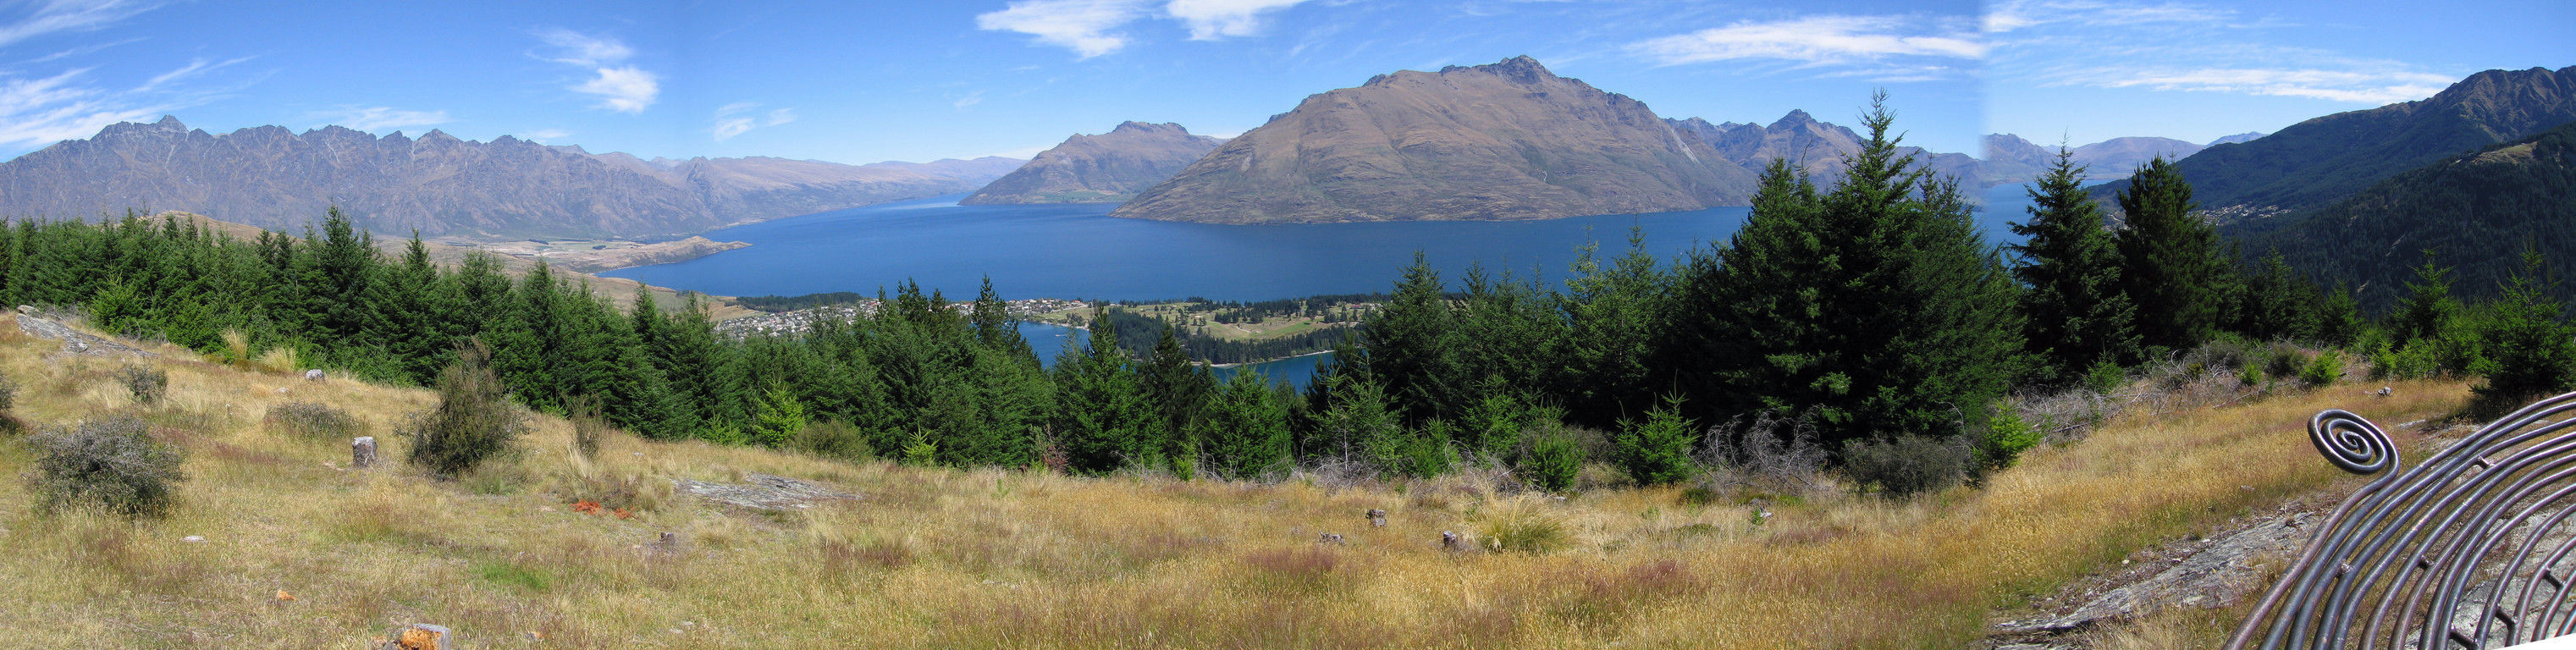 View over Queenstown and the Remarkables, from the summit of Queenstown hill